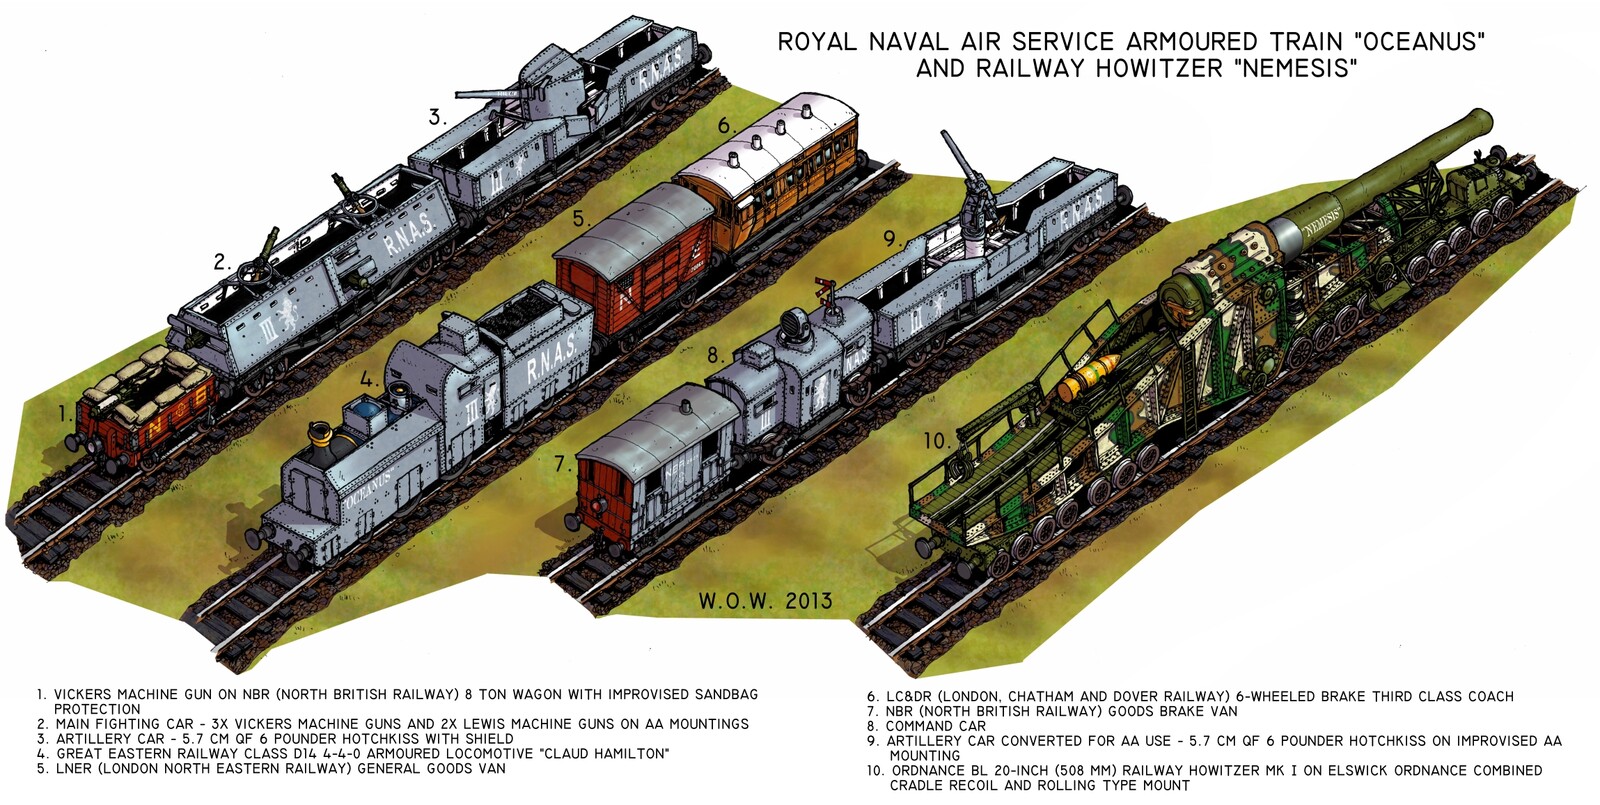 British Armoured Train design for Shadowless, based on real life armoured trains operated by the RNAS (Royal Naval Air Service, the air arm of the Royal Navy) in Belgium during the early part of WW1.